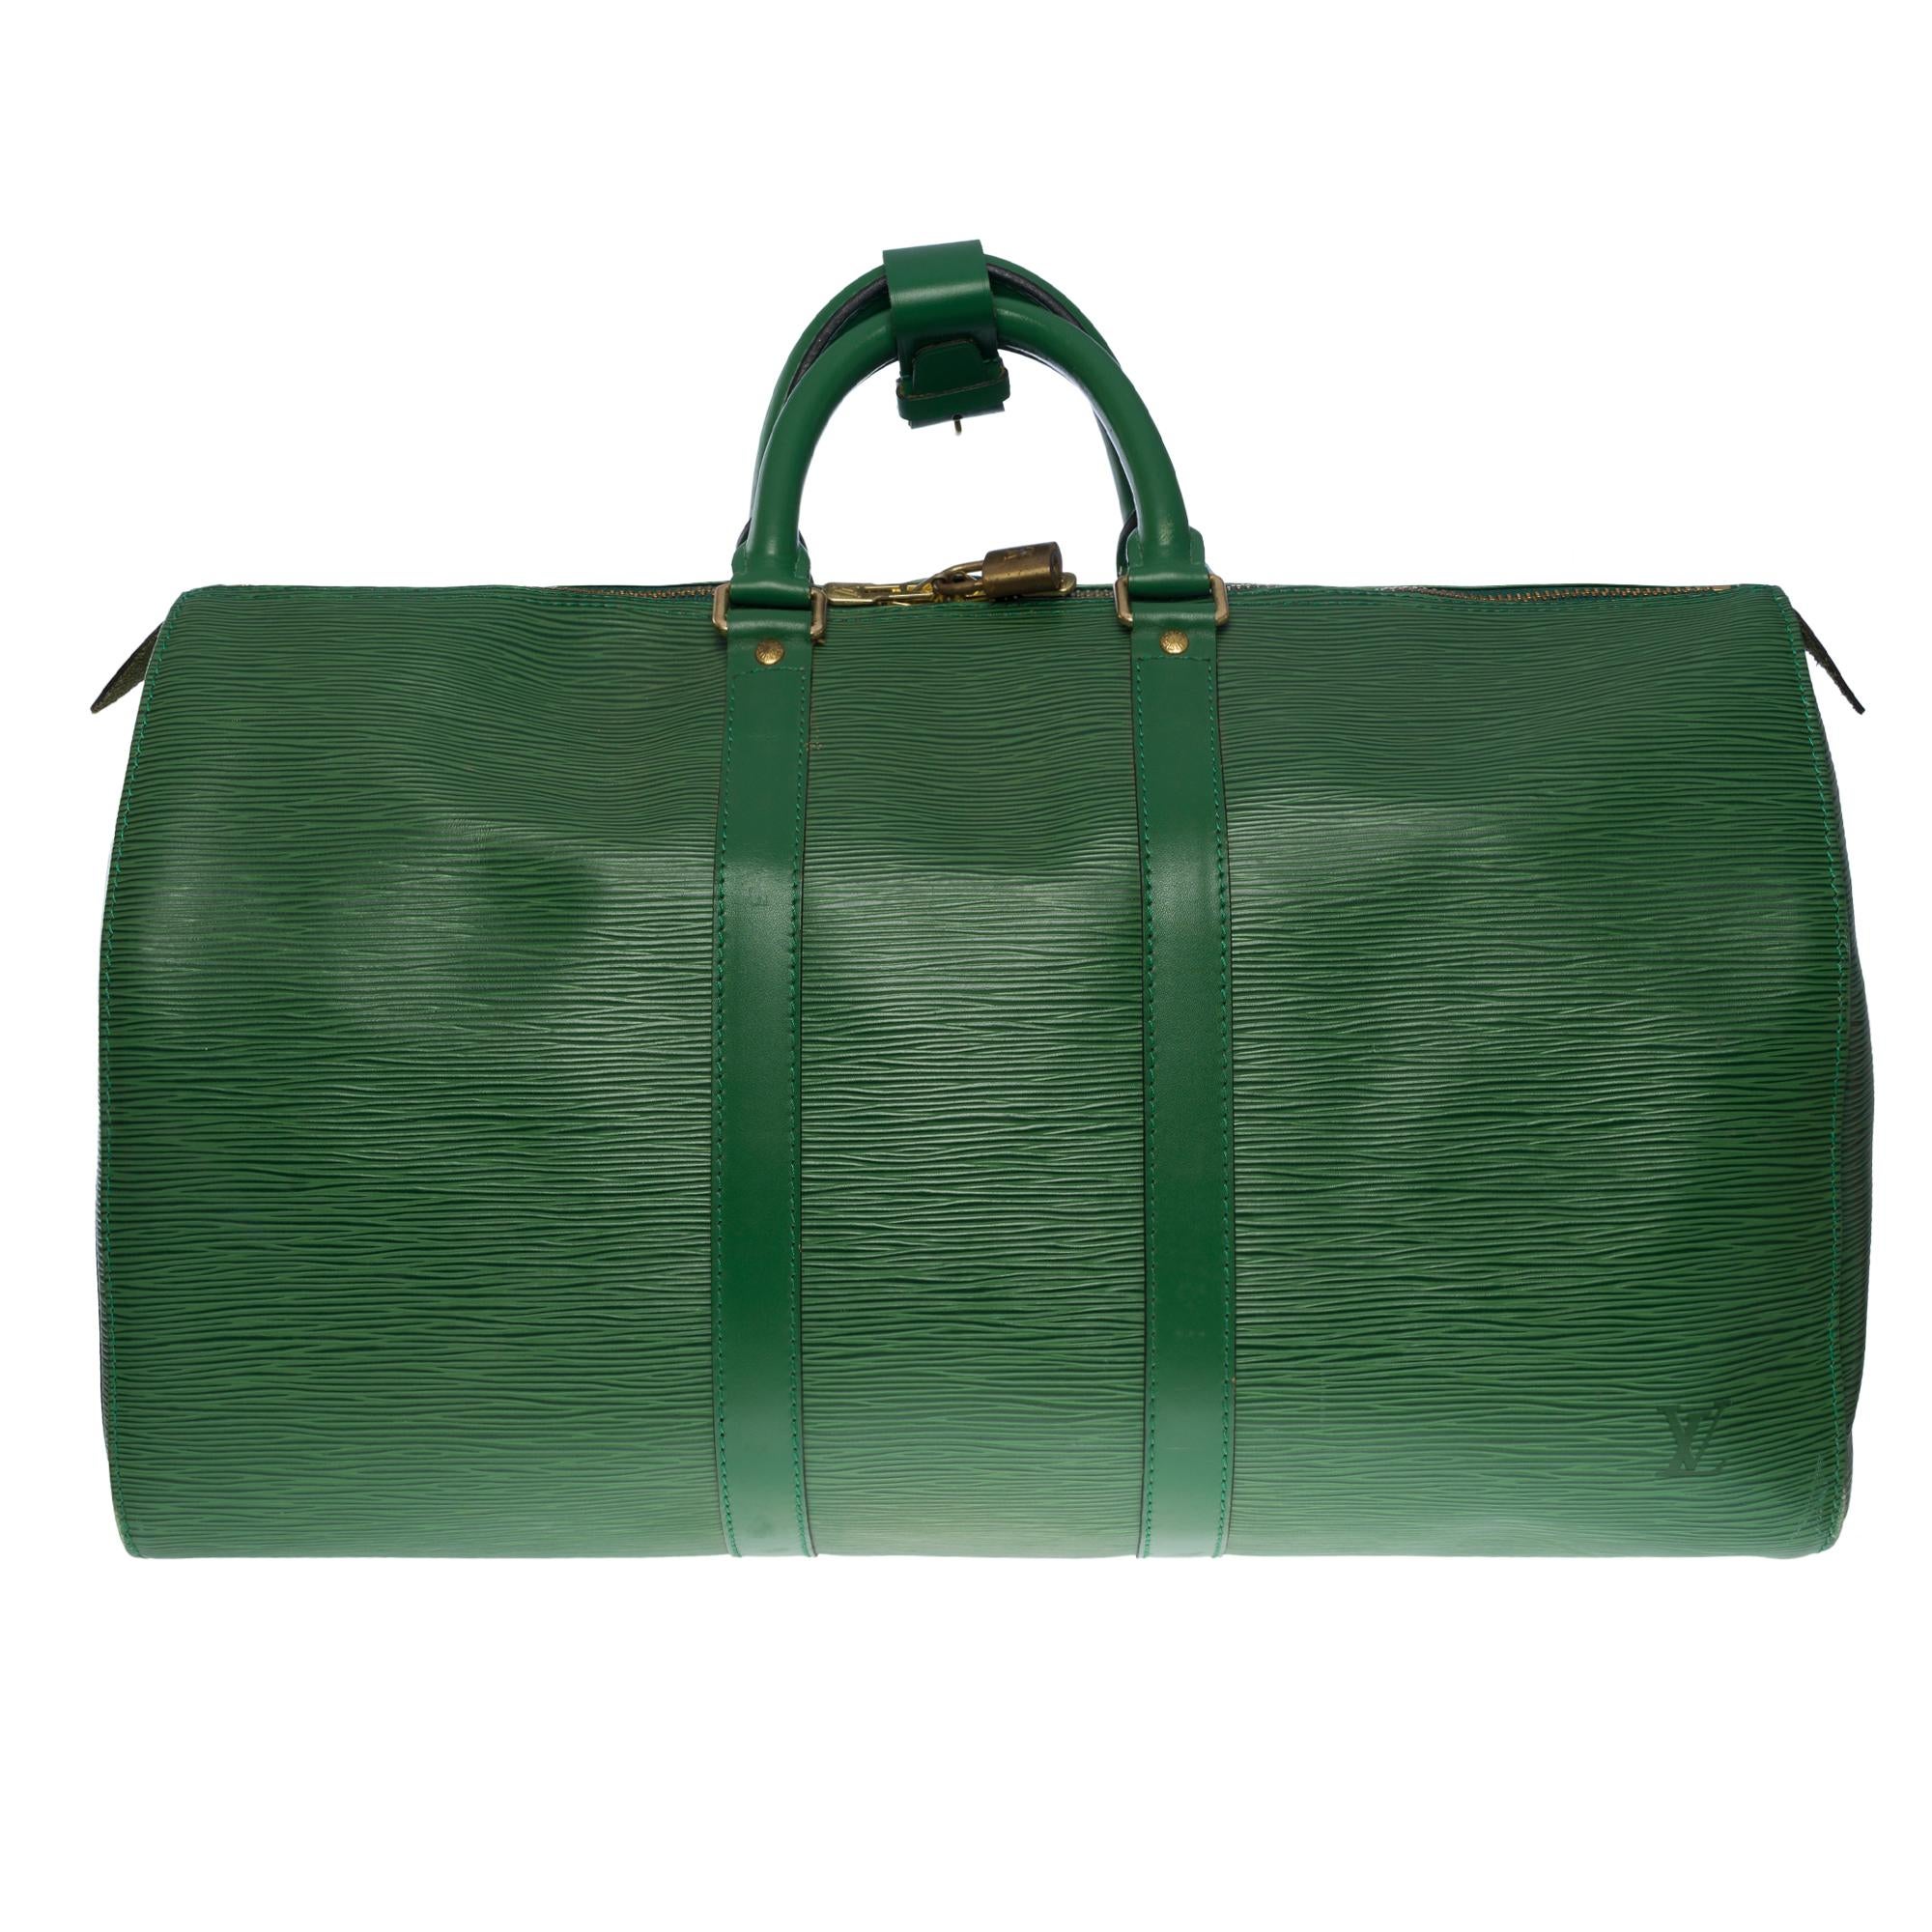 The Very Chic Louis Vuitton “Keepall” 45 cm Travel Bag in Green Epi Leather, double zipper sliders, double green leather handle for a hand carry

Zip closure
A side patch pocket
Green suede inner lining
Signature “LOUIS VUITTON, Made in